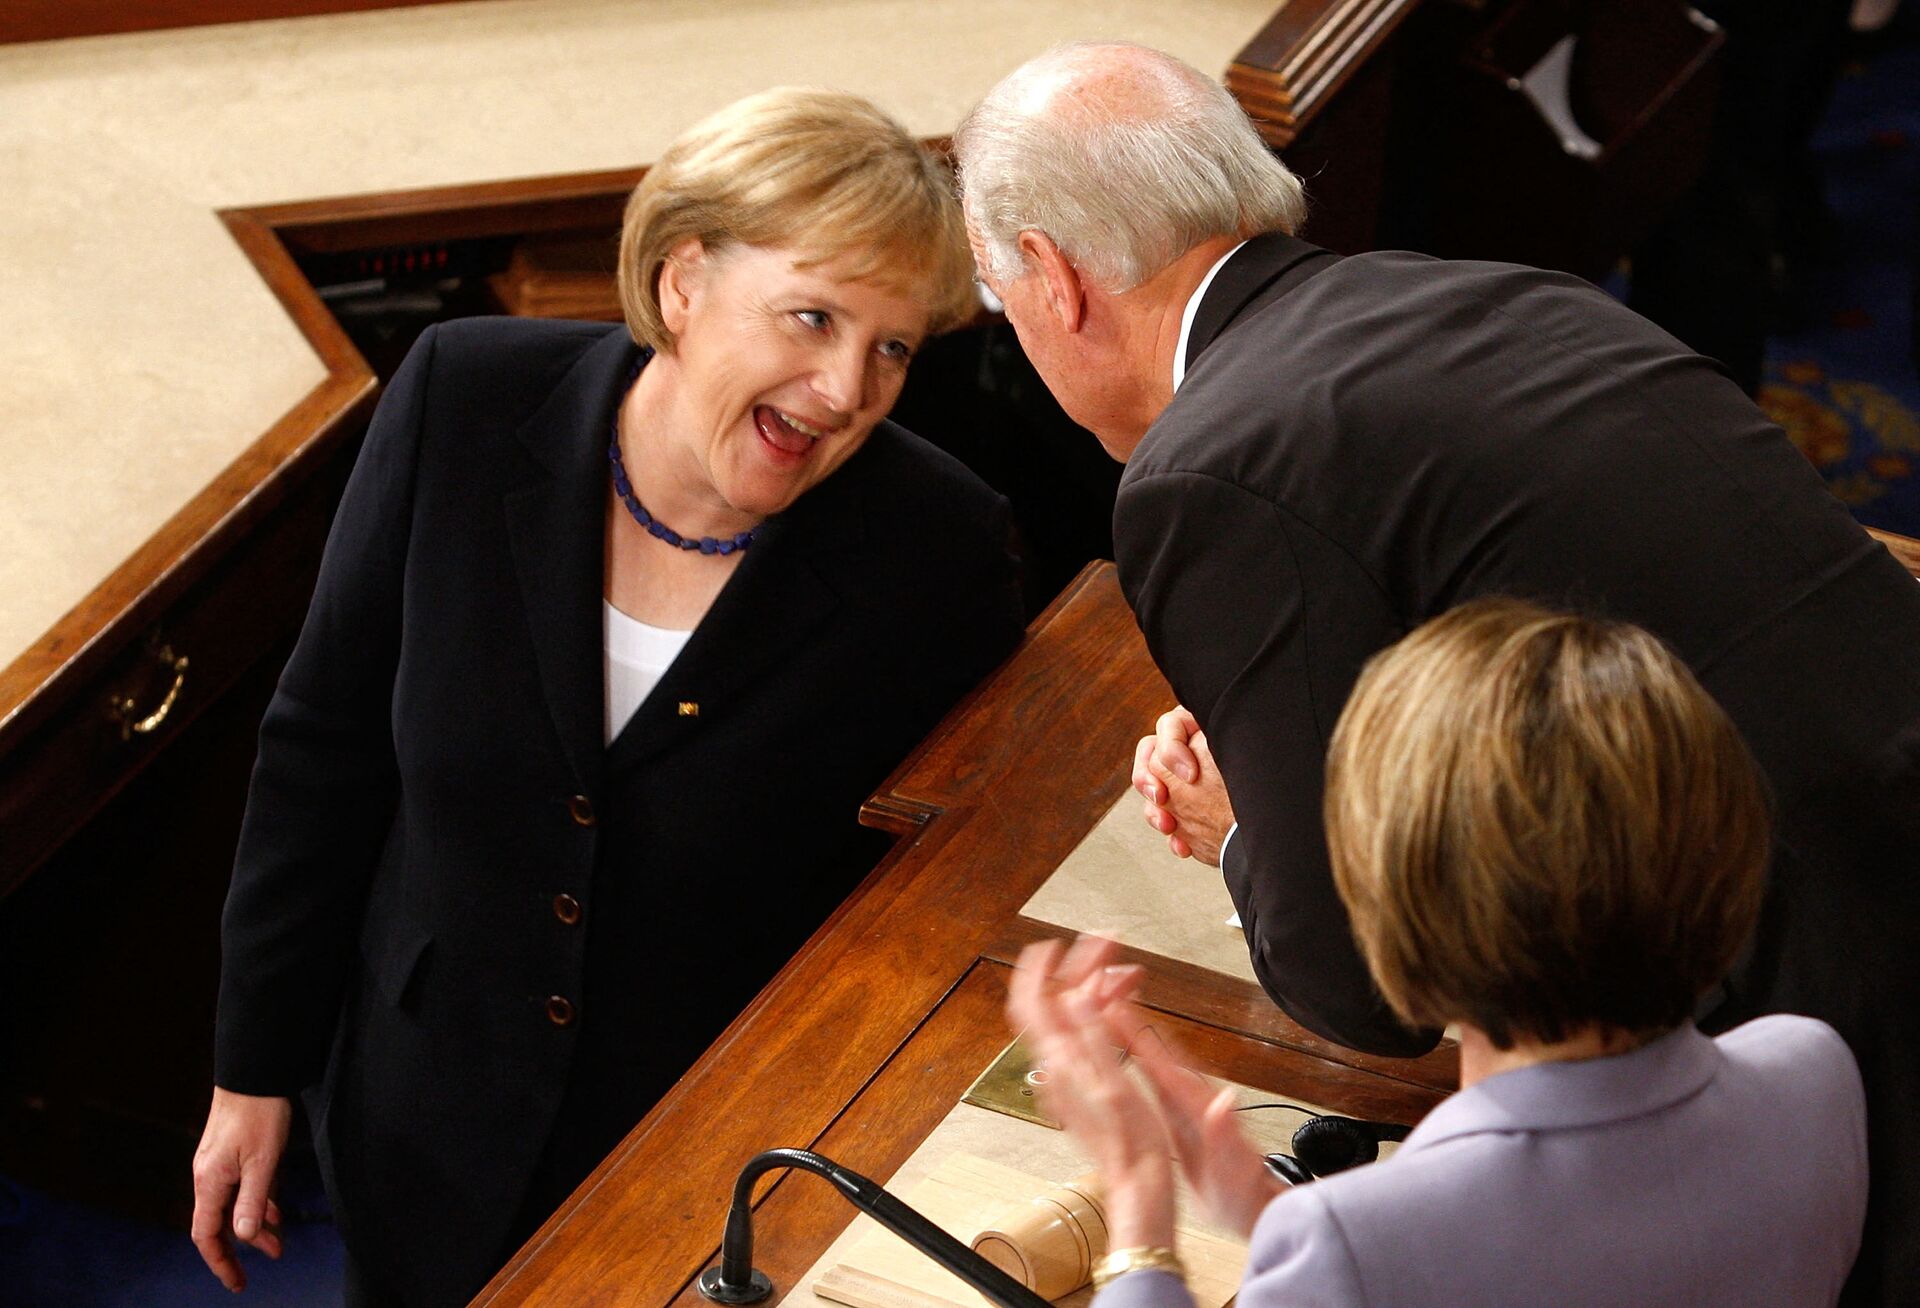 German Chancellor Angela Merkel (L) shares a moment with U.S. Vice President Joseph Biden (2nd R) as Speaker of the House Rep. Nancy Pelosi (D-CA) (R) looks on after Merkel addressed a joint session of the U.S. Congress on Capitol Hill November 3, 2009 in Washington, DC. - Sputnik International, 1920, 07.09.2021